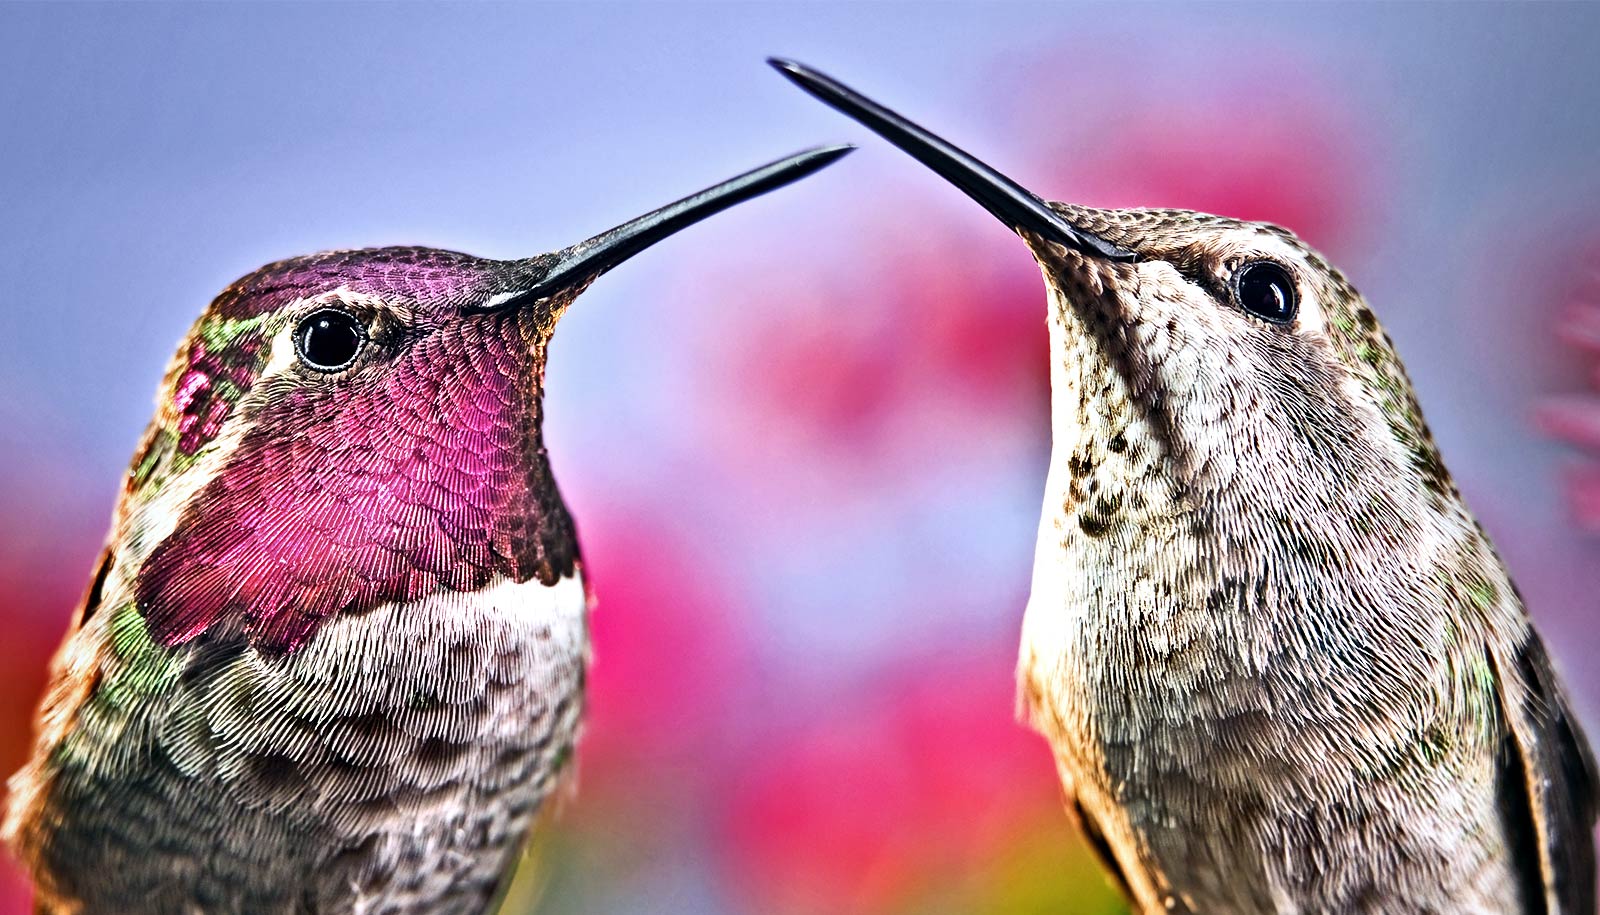 Some Hummingbird Beaks Are Better For Fencing Than Food Futurity,Card Game Spoons Instructions